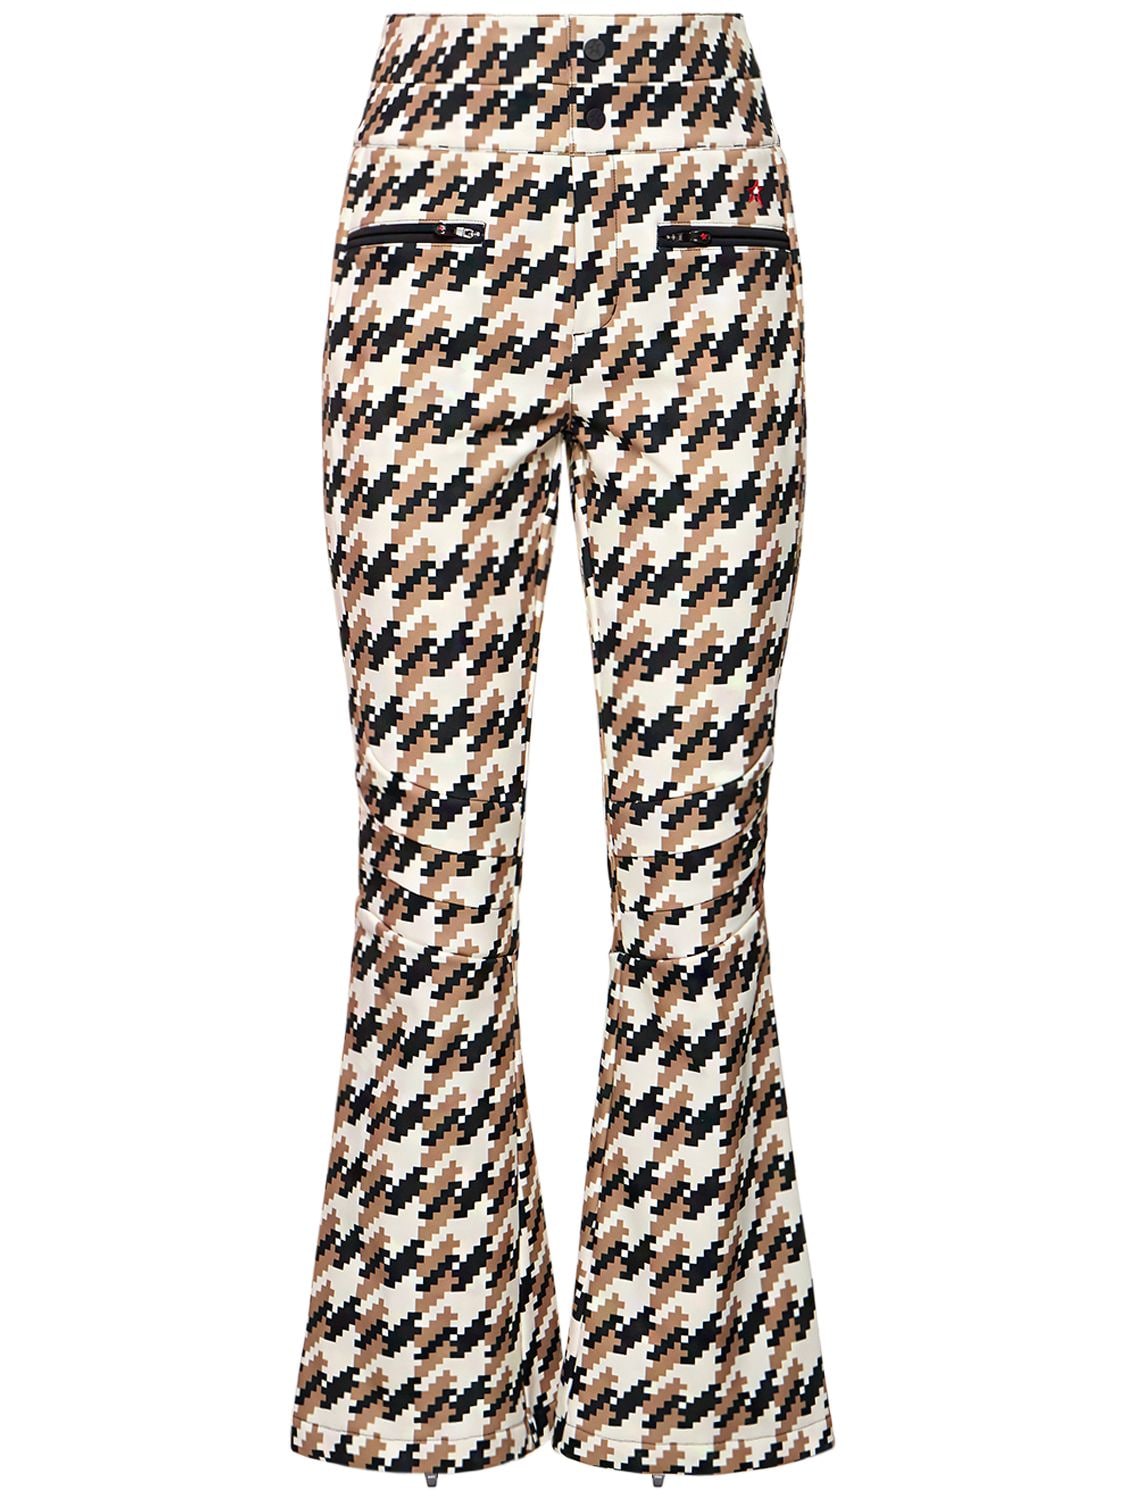 PERFECT MOMENT AURORA HIGH WAIST FLARED trousers